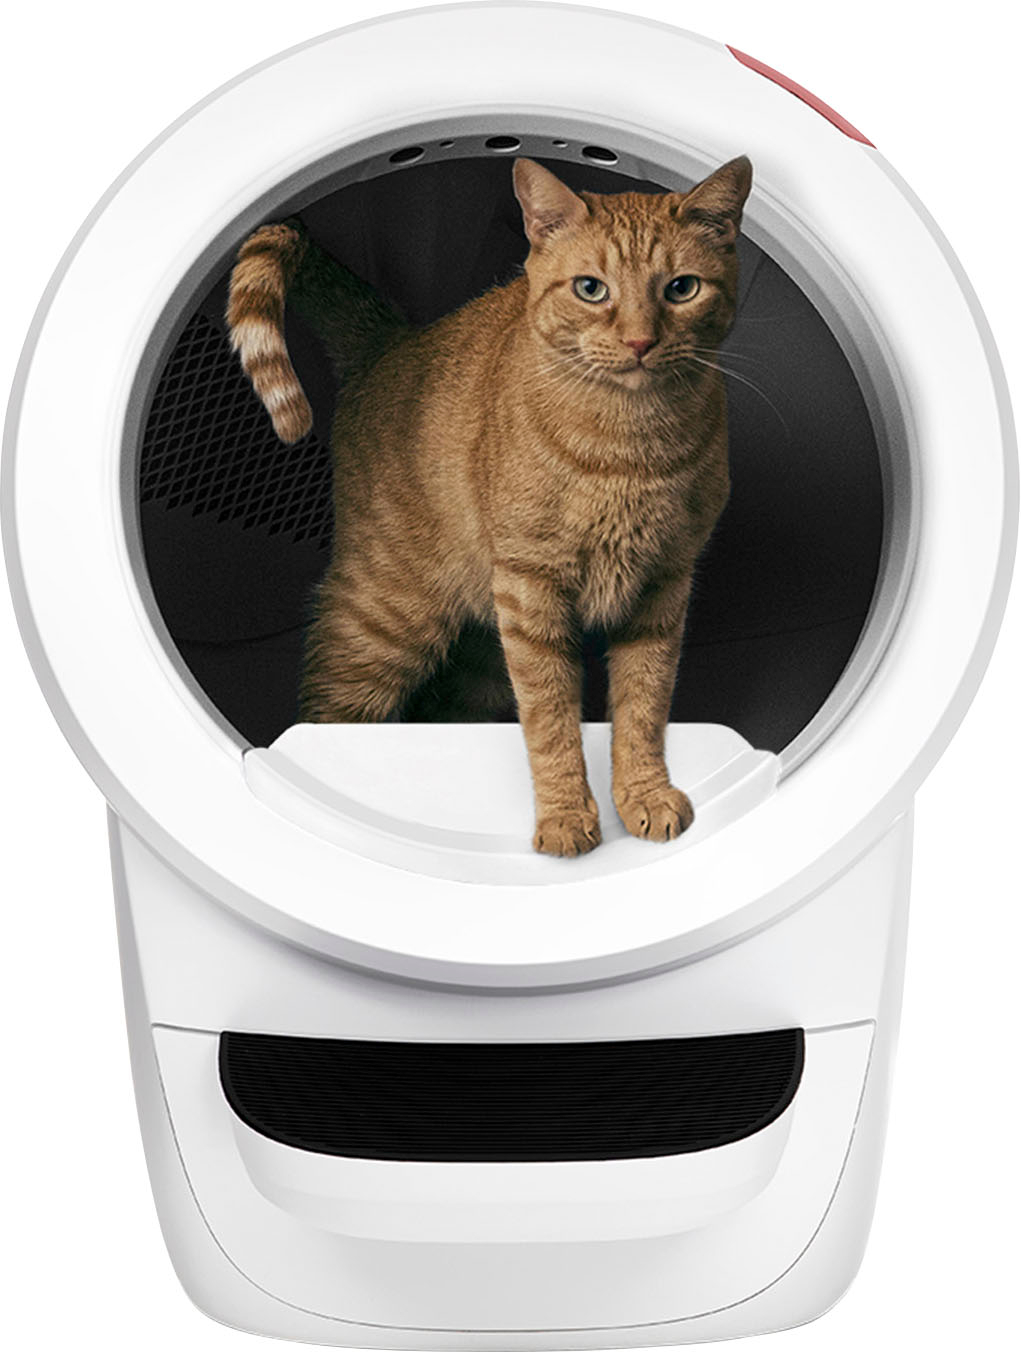 Litter-Robot 4 WiFi-Enabled Covered Automatic Self-Cleaning Cat Litter Box with Step White LR4-0101-00-US - Buy